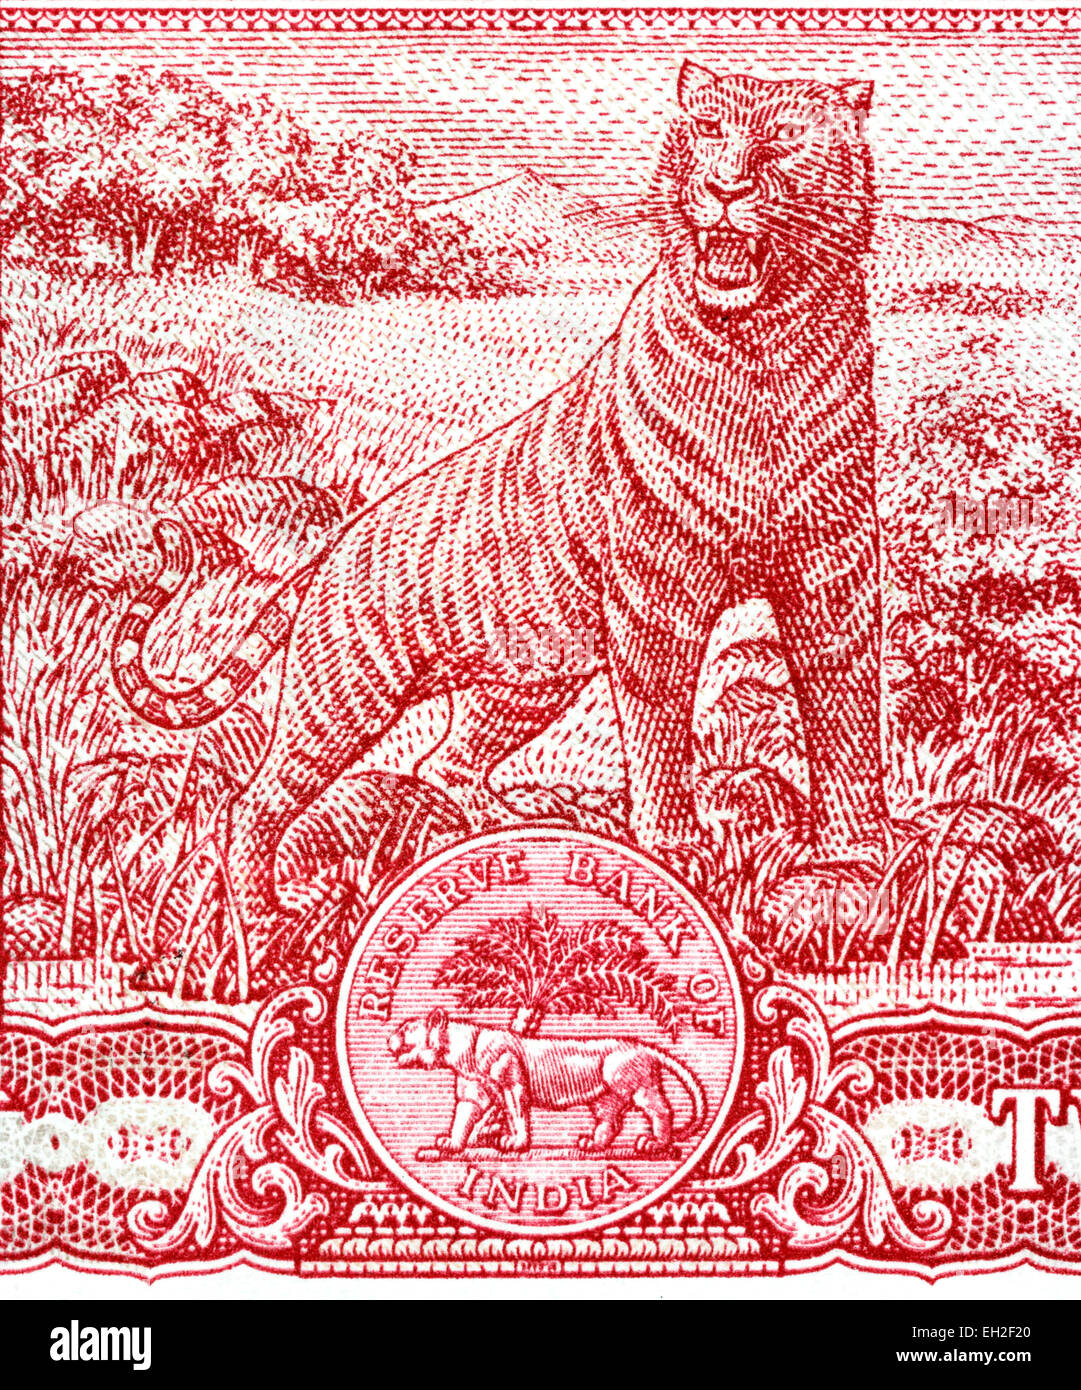 Bengal tiger from 2 rupees banknote, India, 1985 Stock Photo